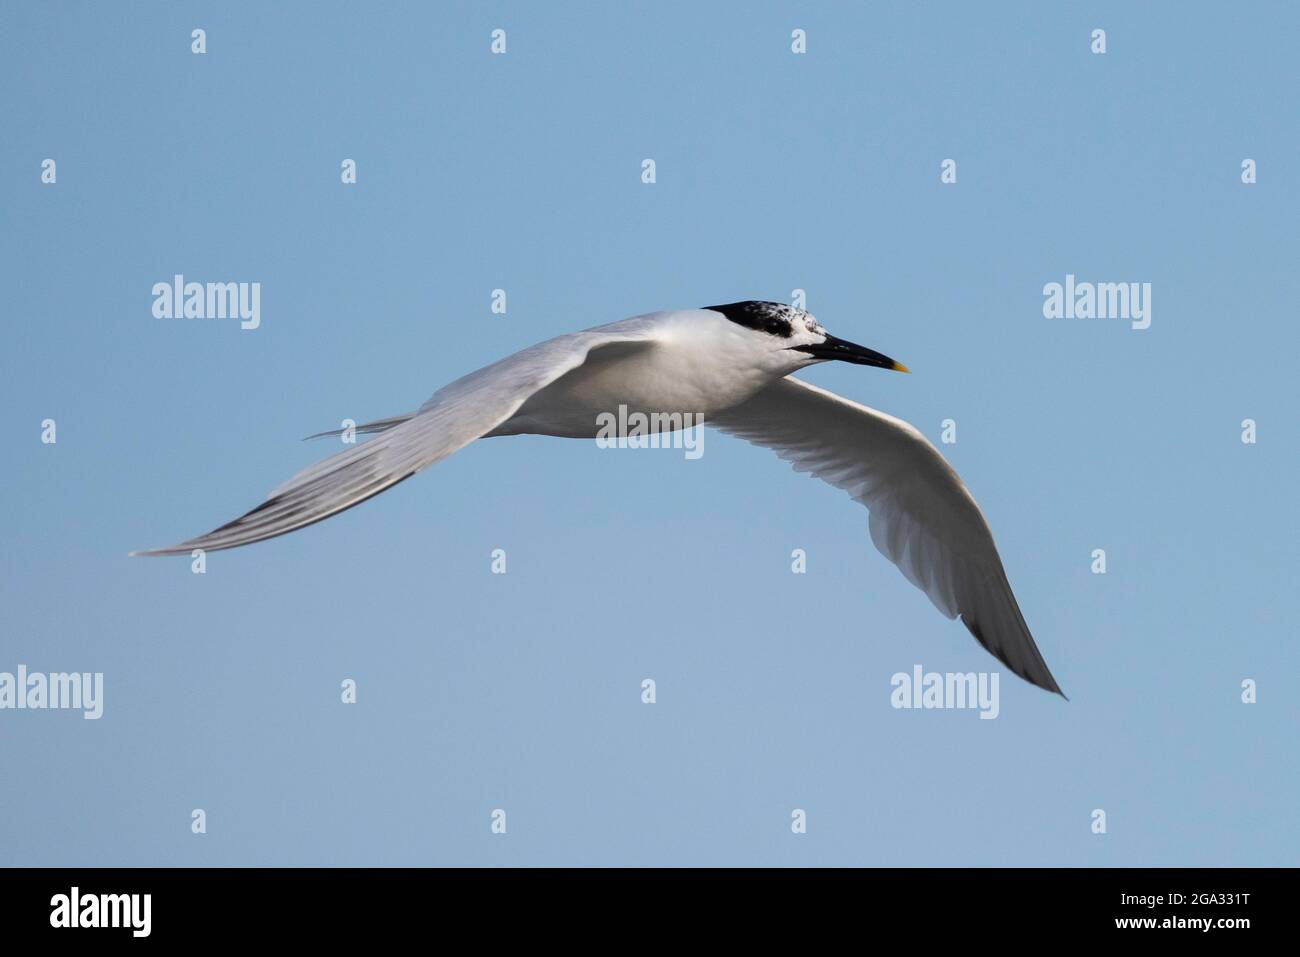 Sandwich Tern (Sterna sandvicensis) in flight carrying a fish, Anglesey, Wales. Stock Photo